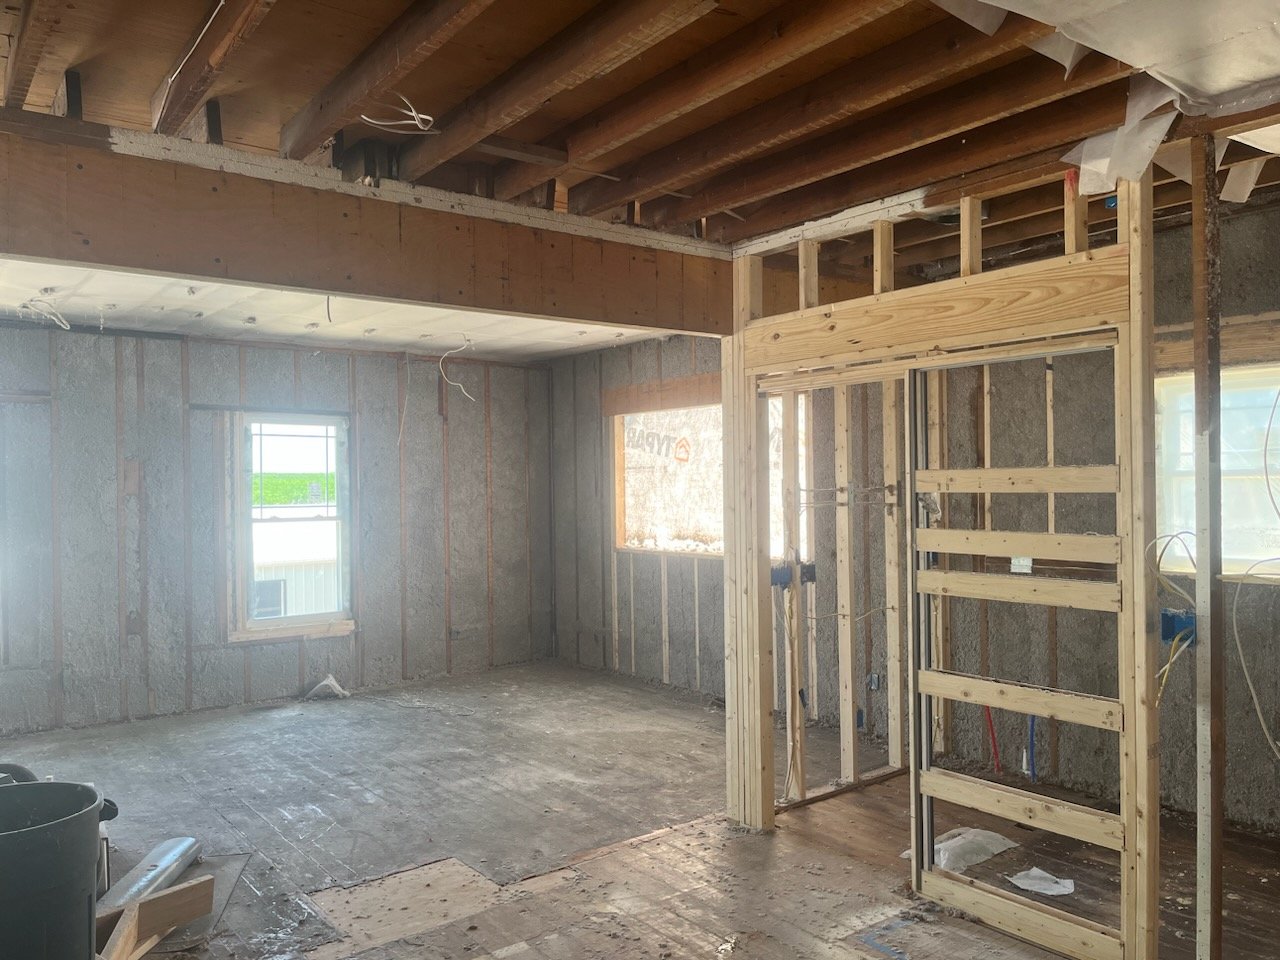 🏠 Ready to upgrade your home's insulation?
-
Look no further than Ballard's Insulation! We'll customize a solution to maximize your comfort and energy efficiency with options including Fiberglass, Cellulose, and Spray Foam.
-
Free estimates at the l